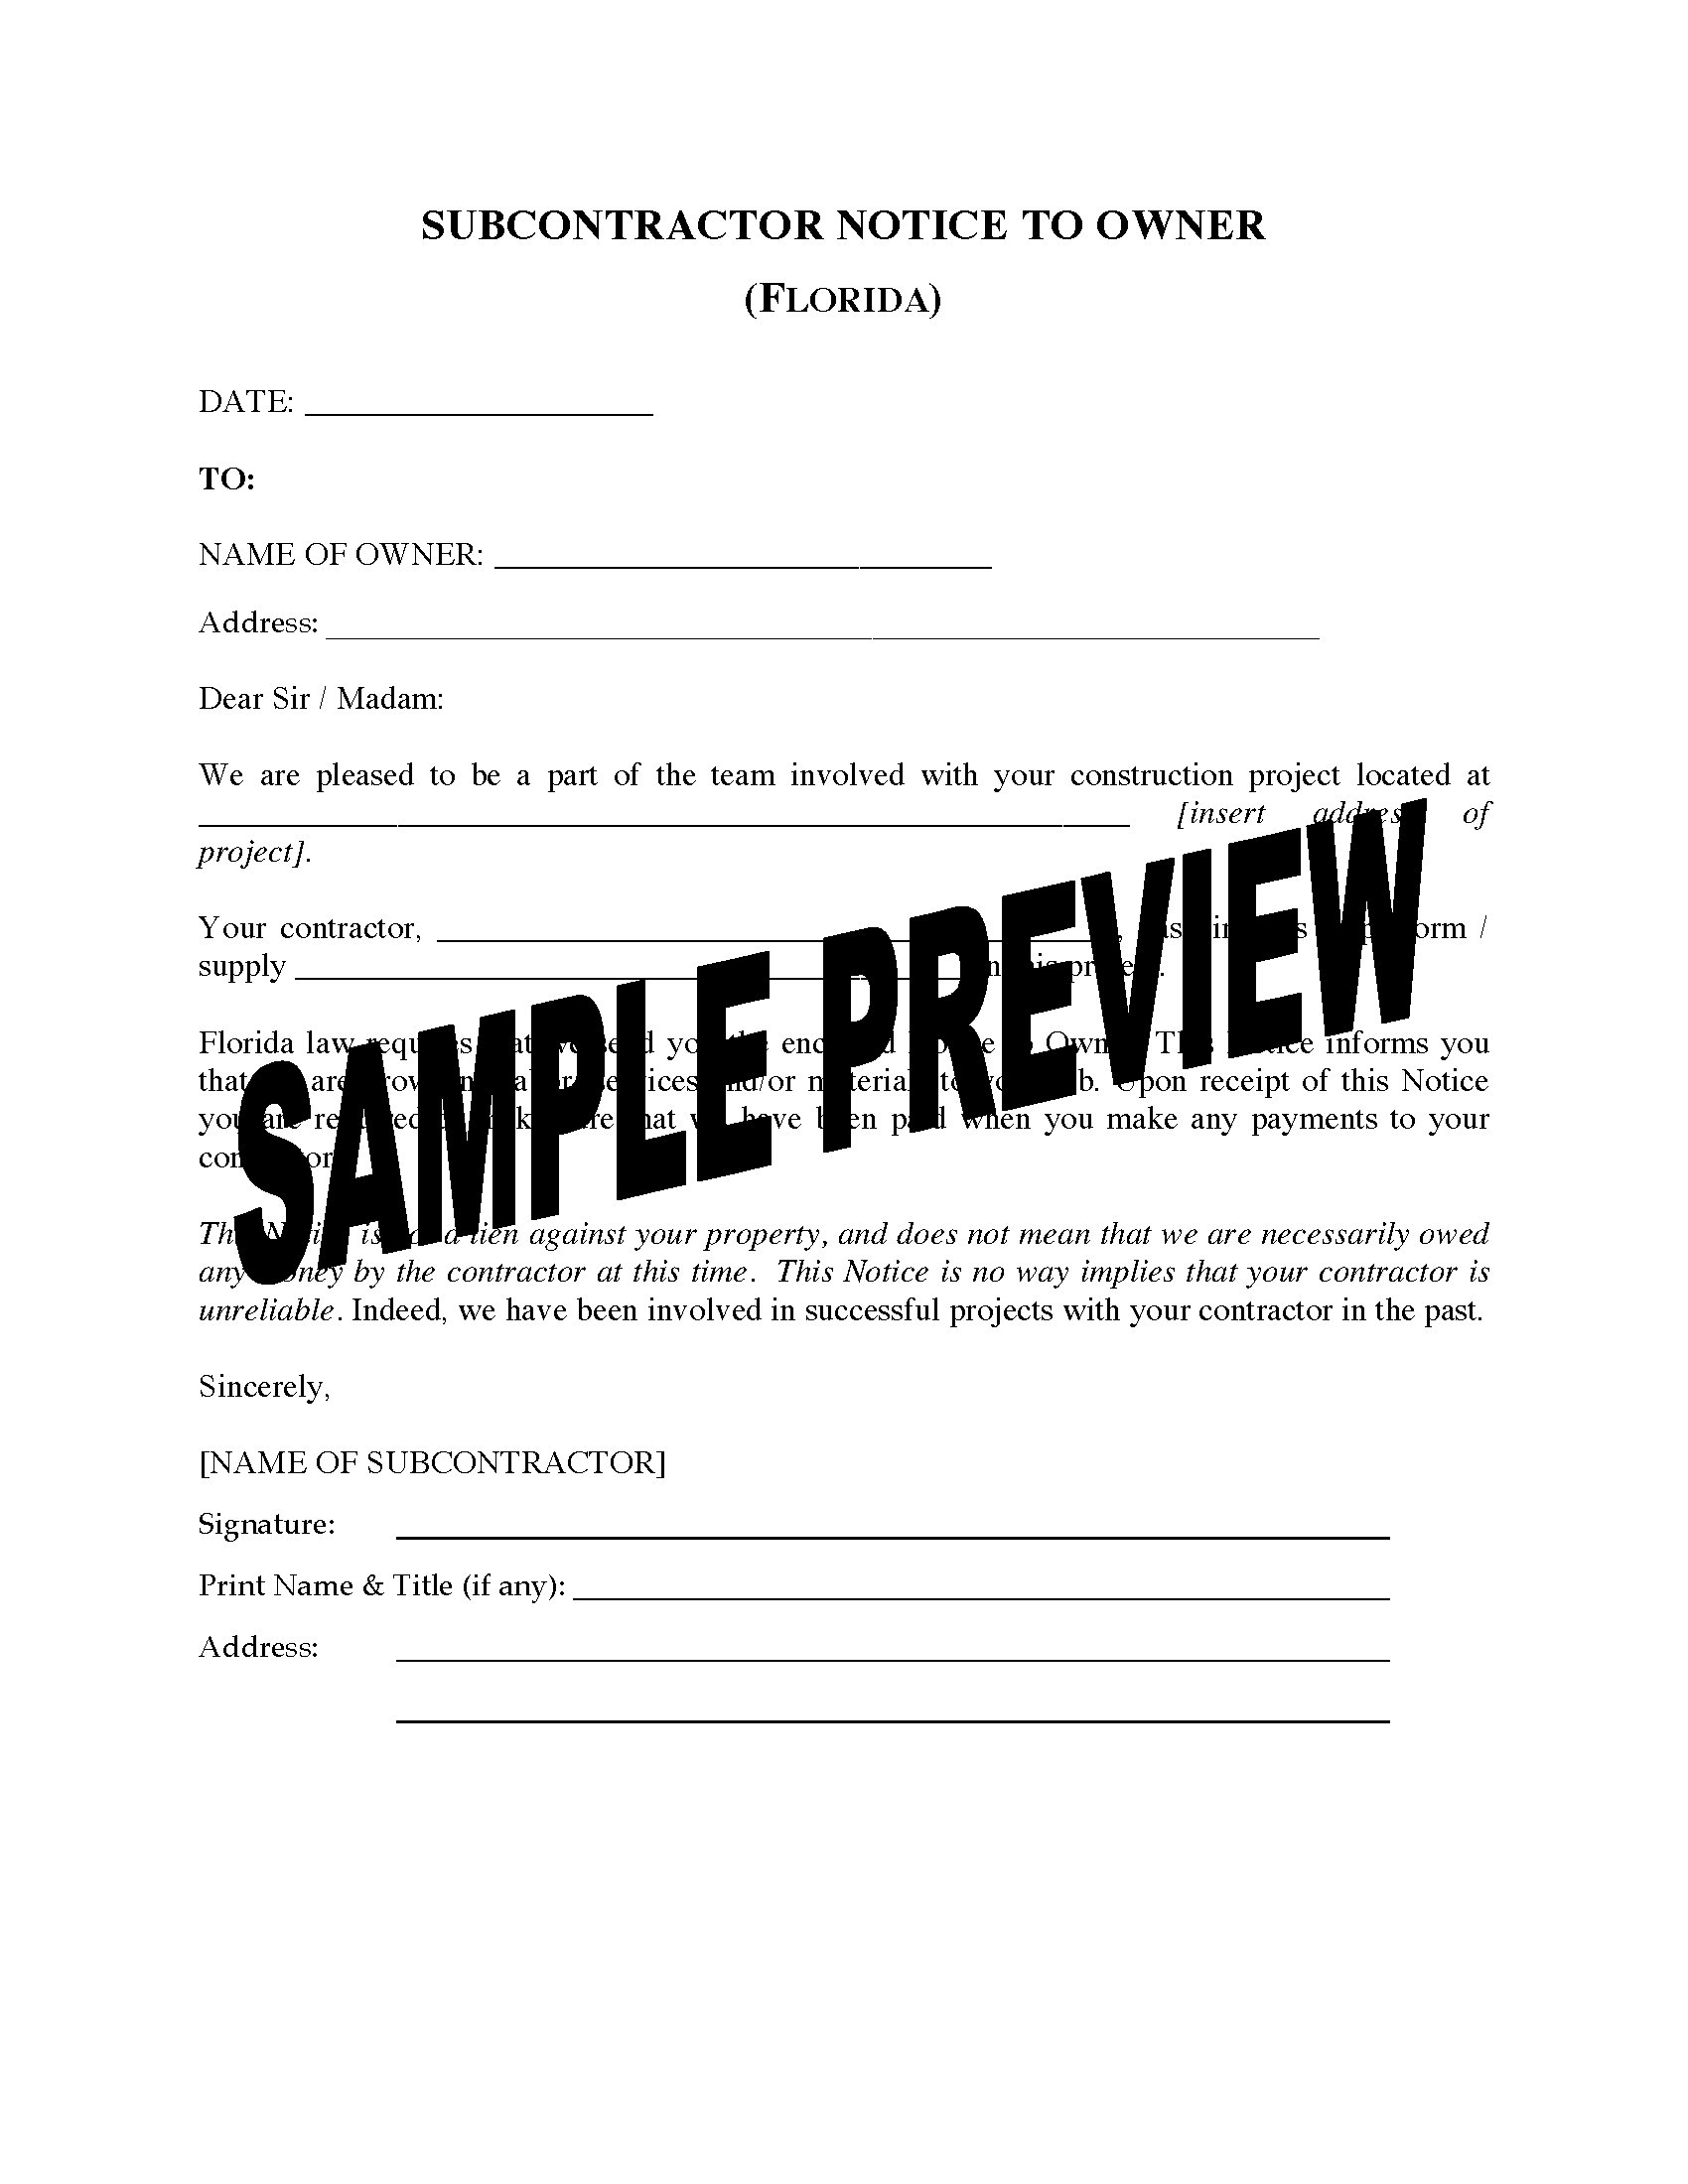 printable-florida-notice-to-owner-form